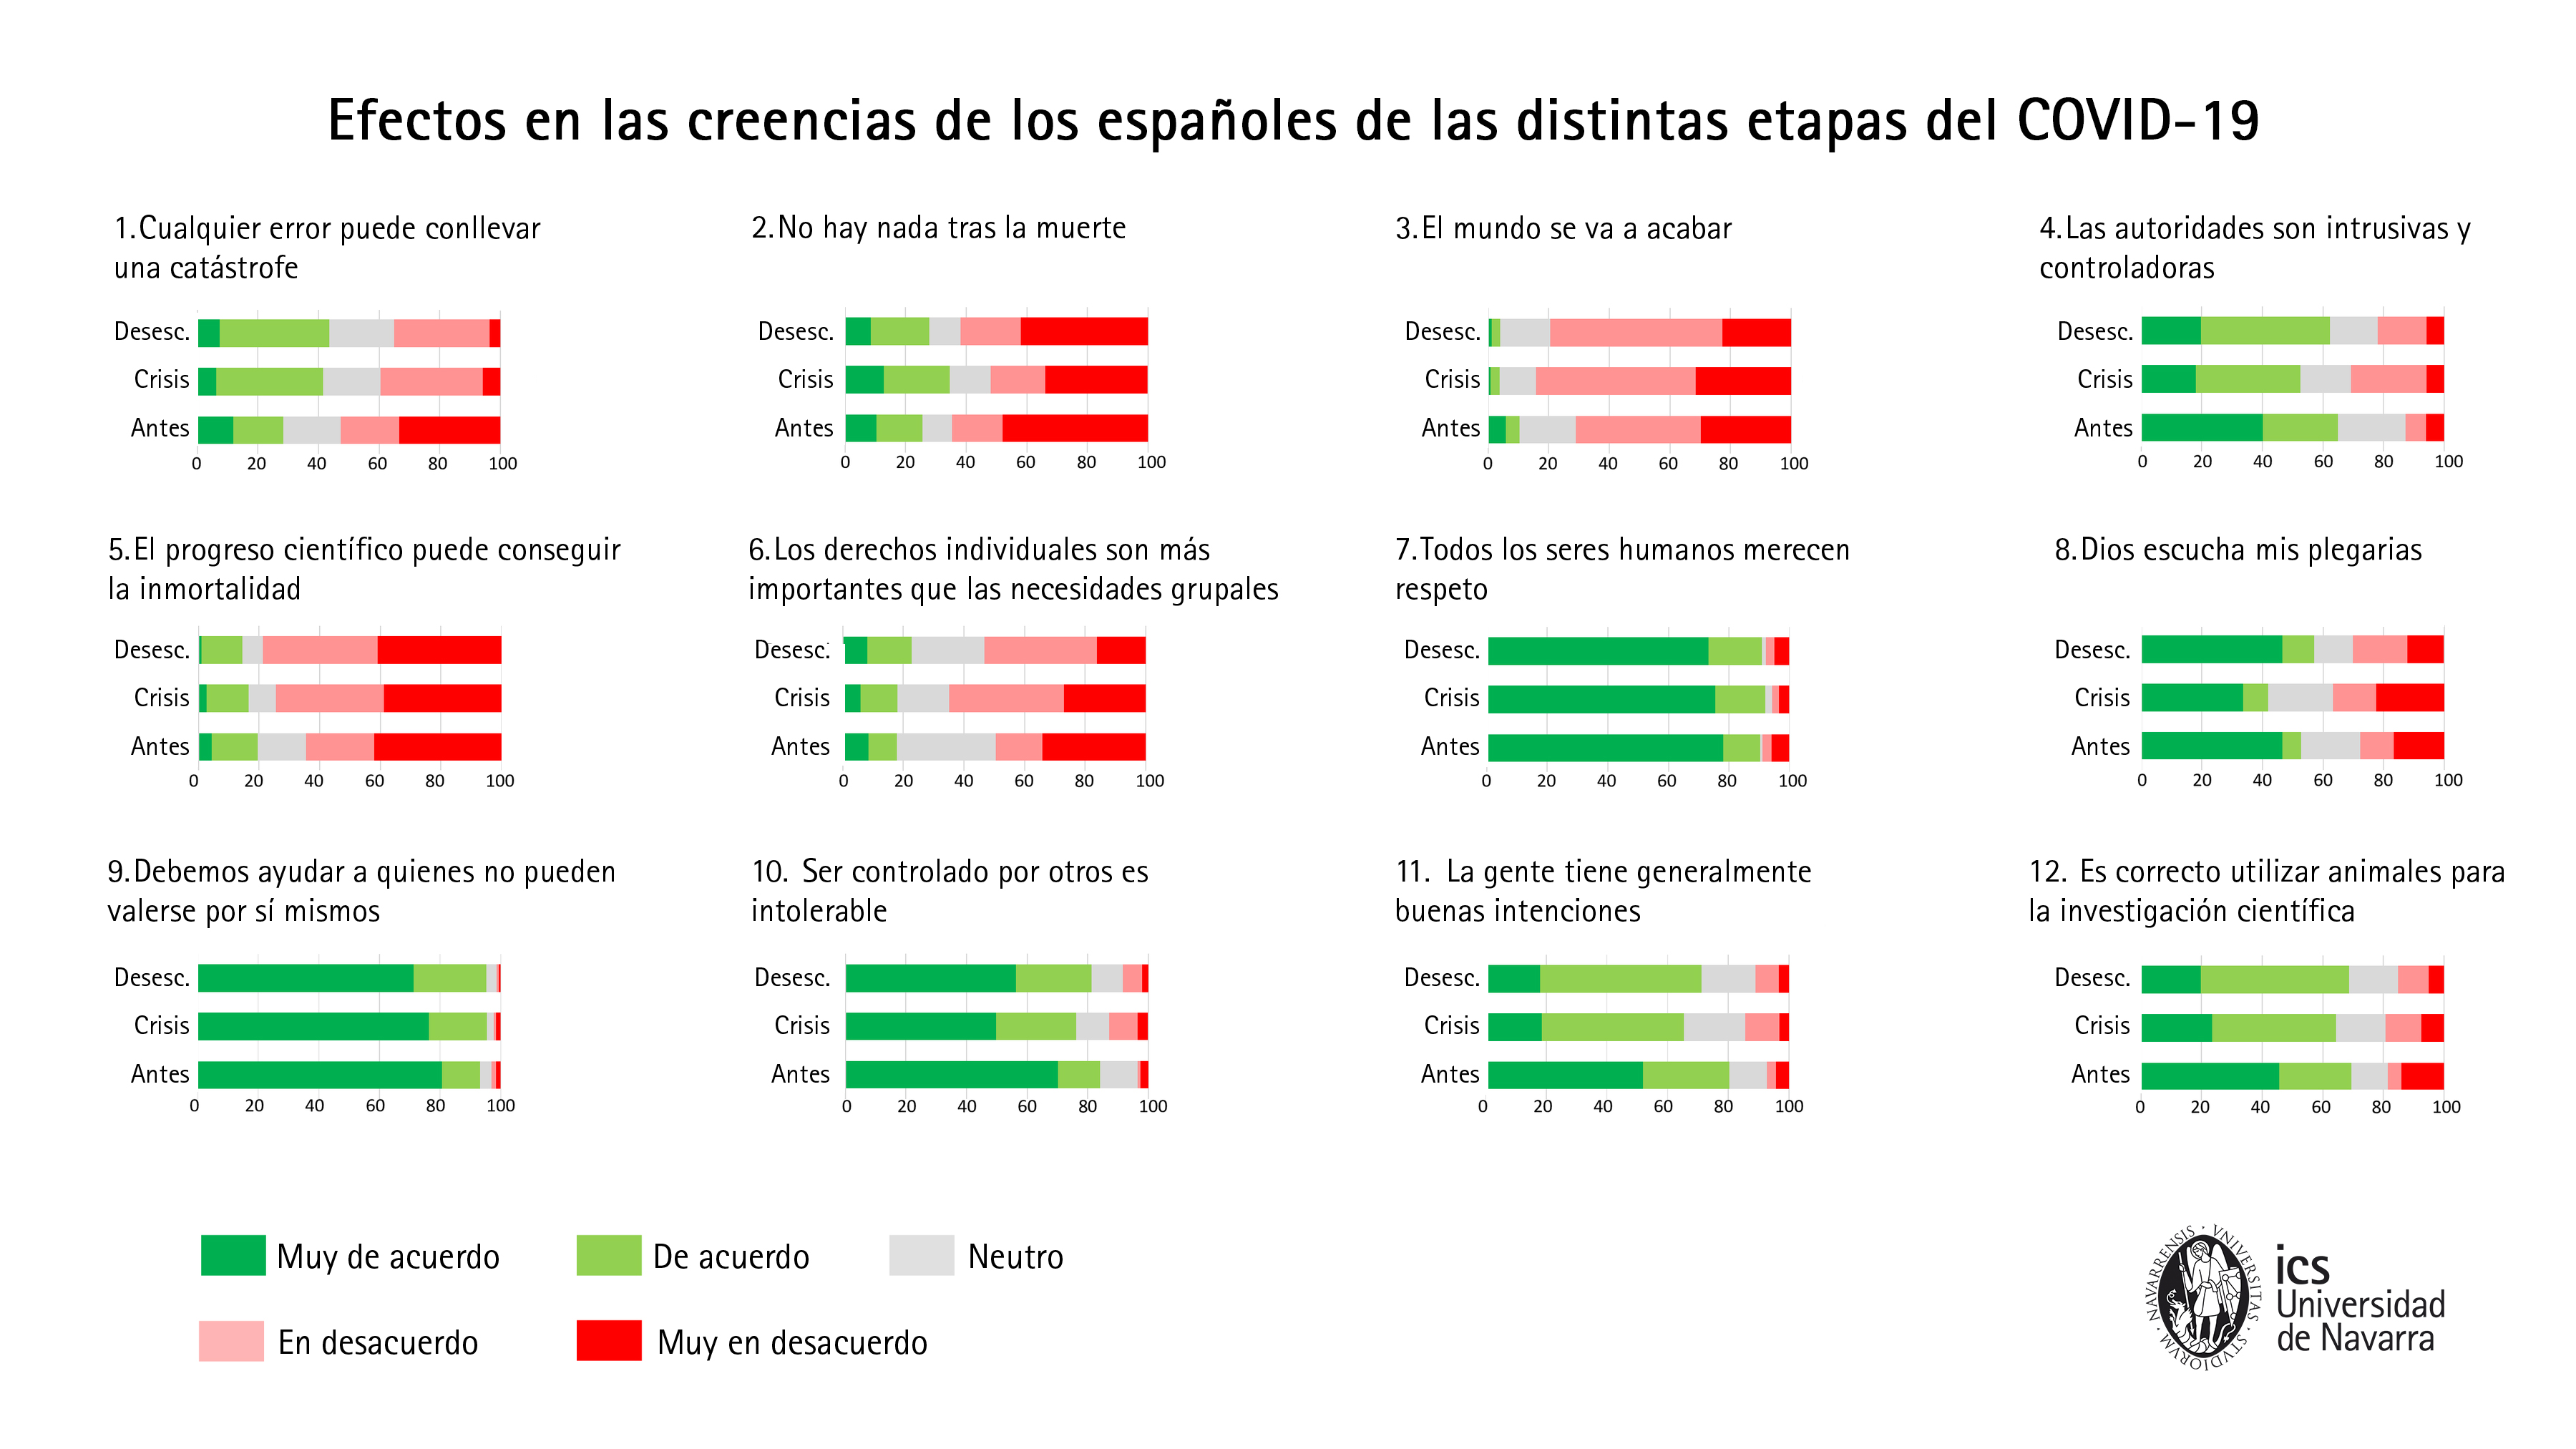 Effects on Spaniards' beliefs at different stages of Covid-19